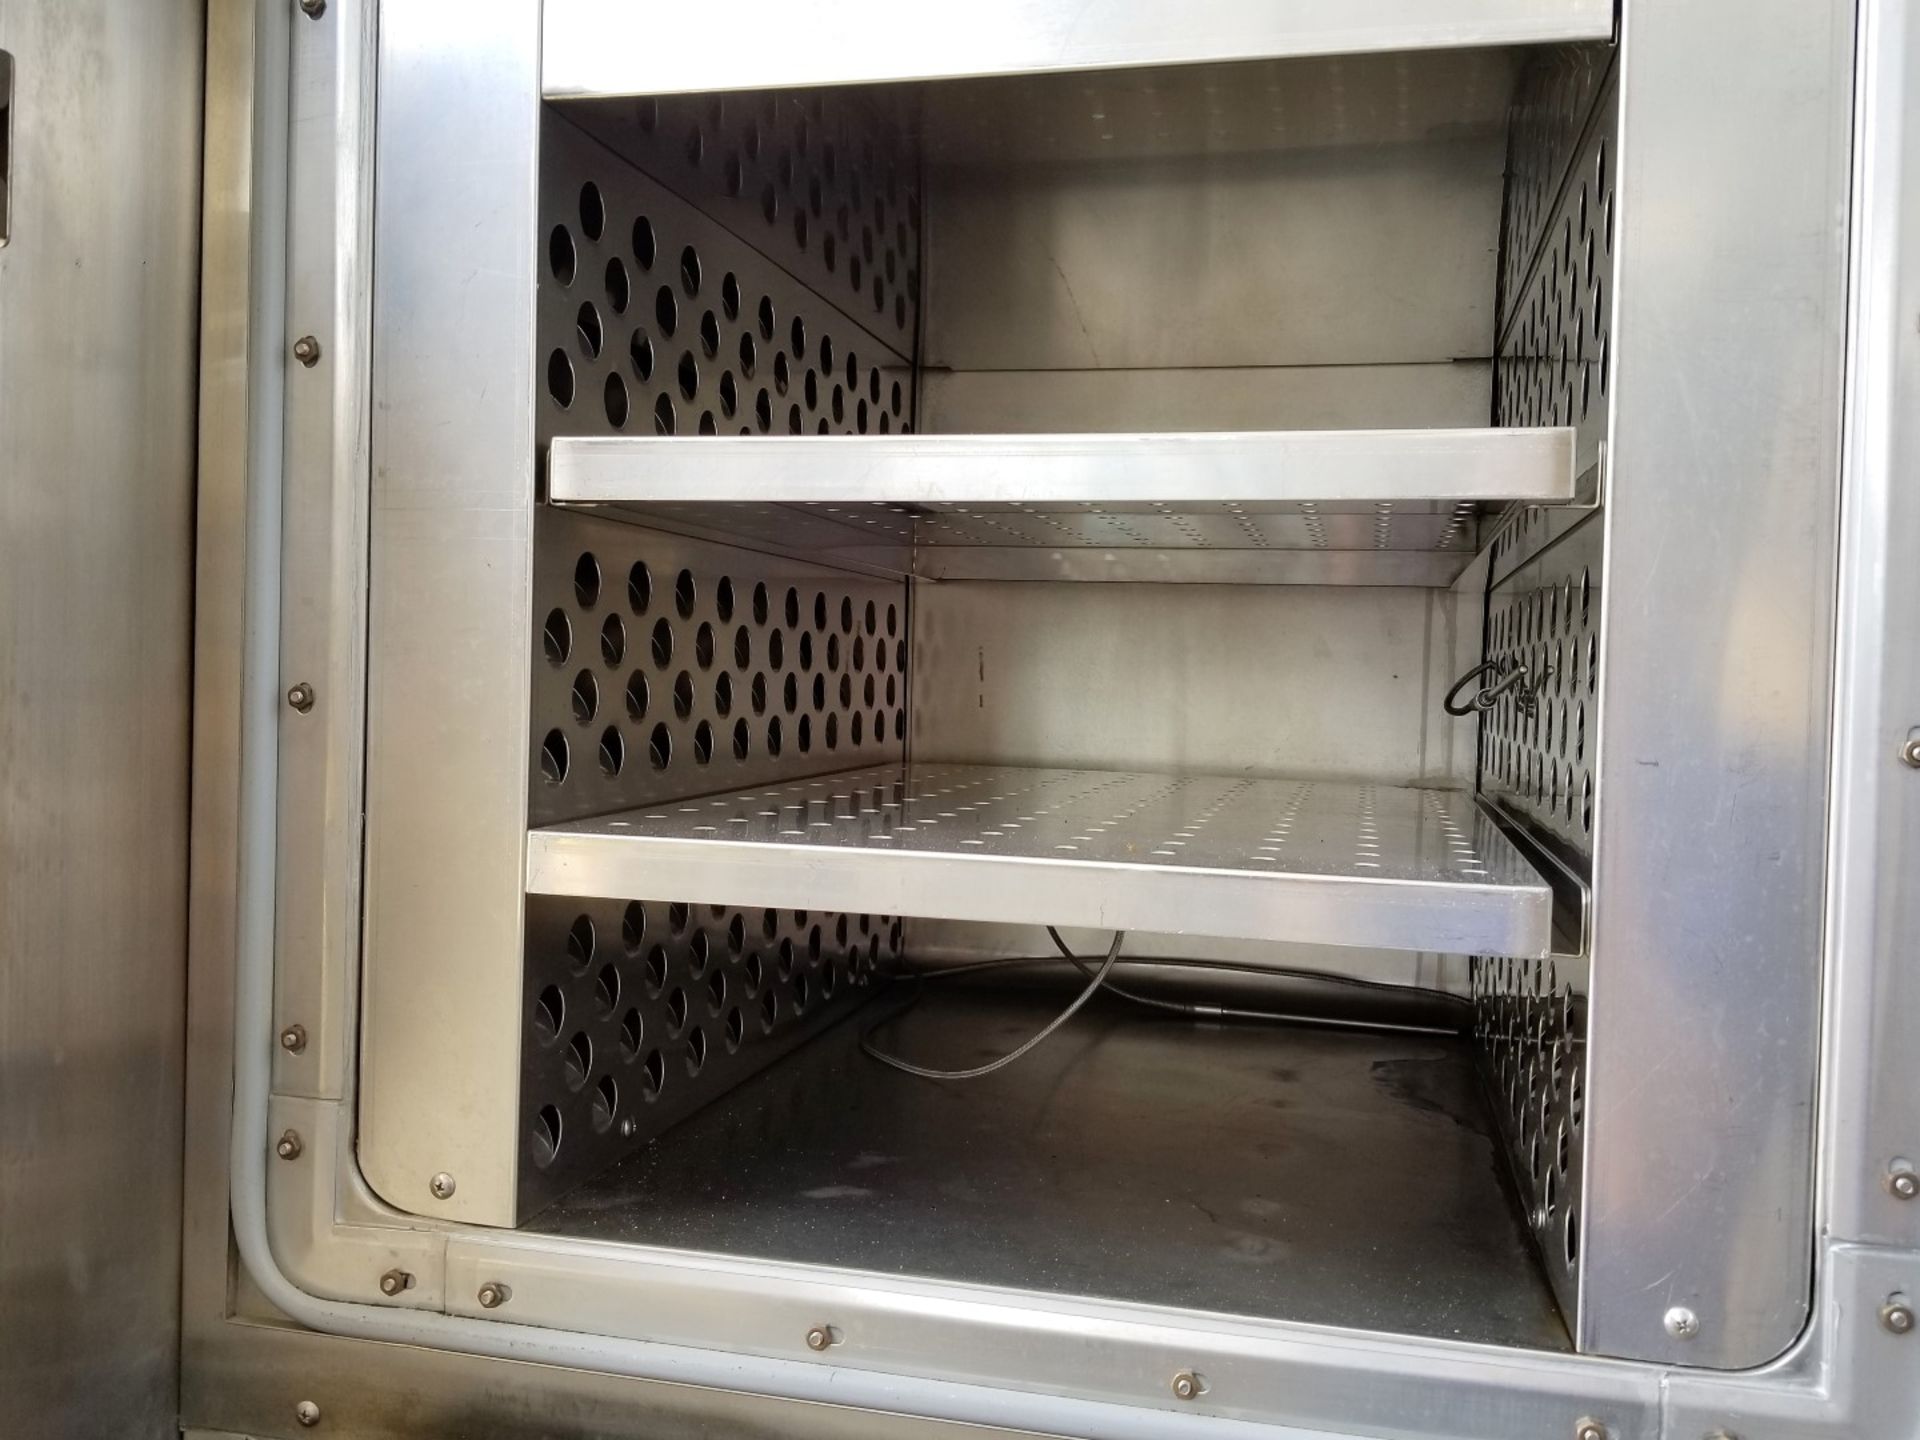 Lot Location: Greensboro NC Used Gruenberg Industrial Dual Cabinet Vacuum Drying Oven C/V15H4.5M - Image 3 of 4